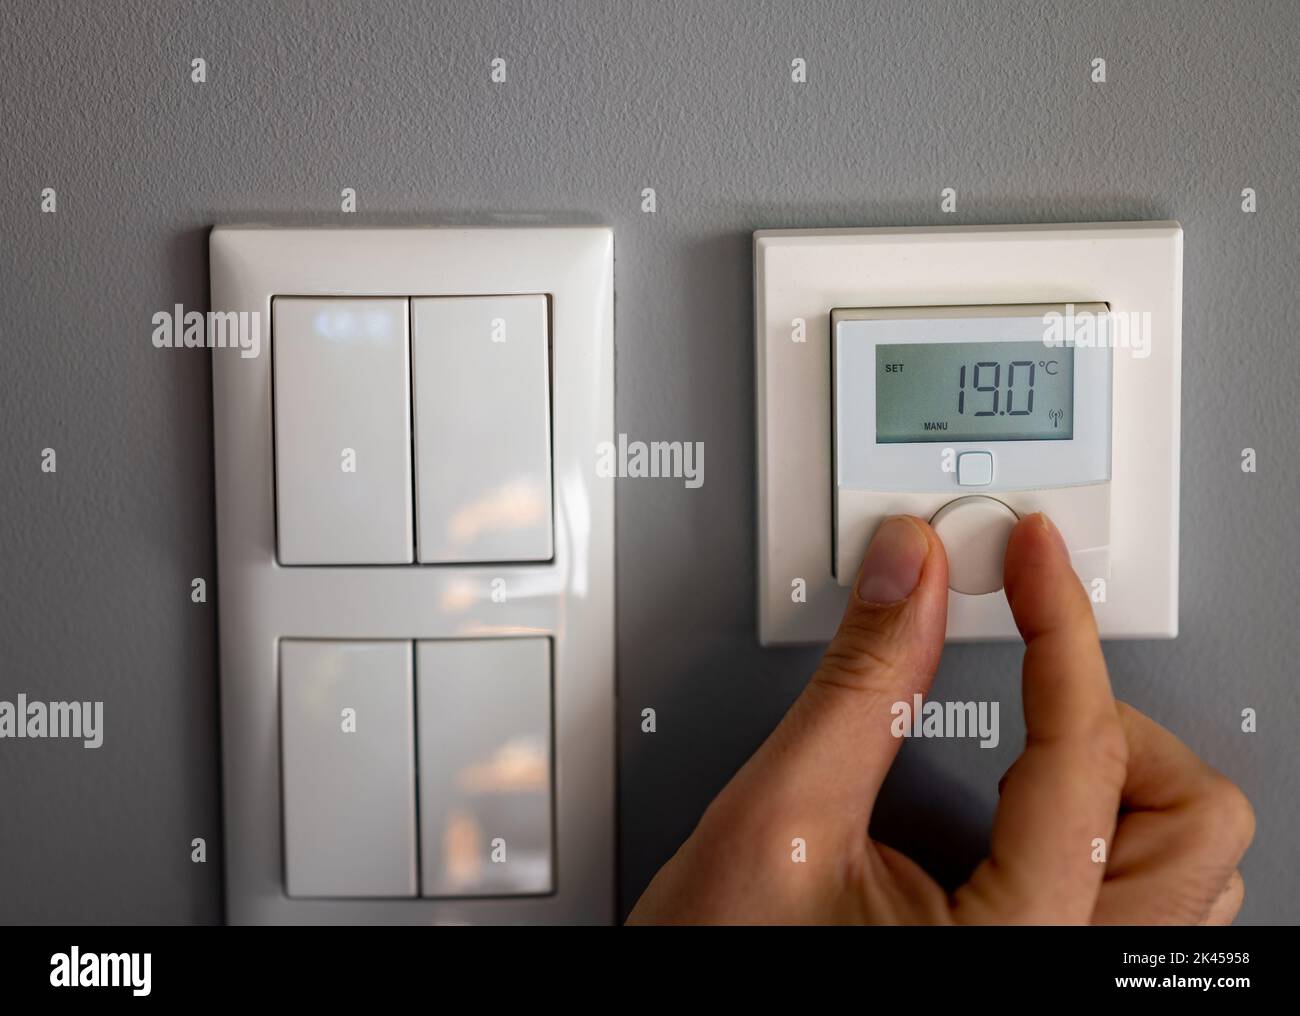 Hand turns down the temperature to 19 degrees Celsius on a electronic thermostat. Symbol for saving energy. Stock Photo